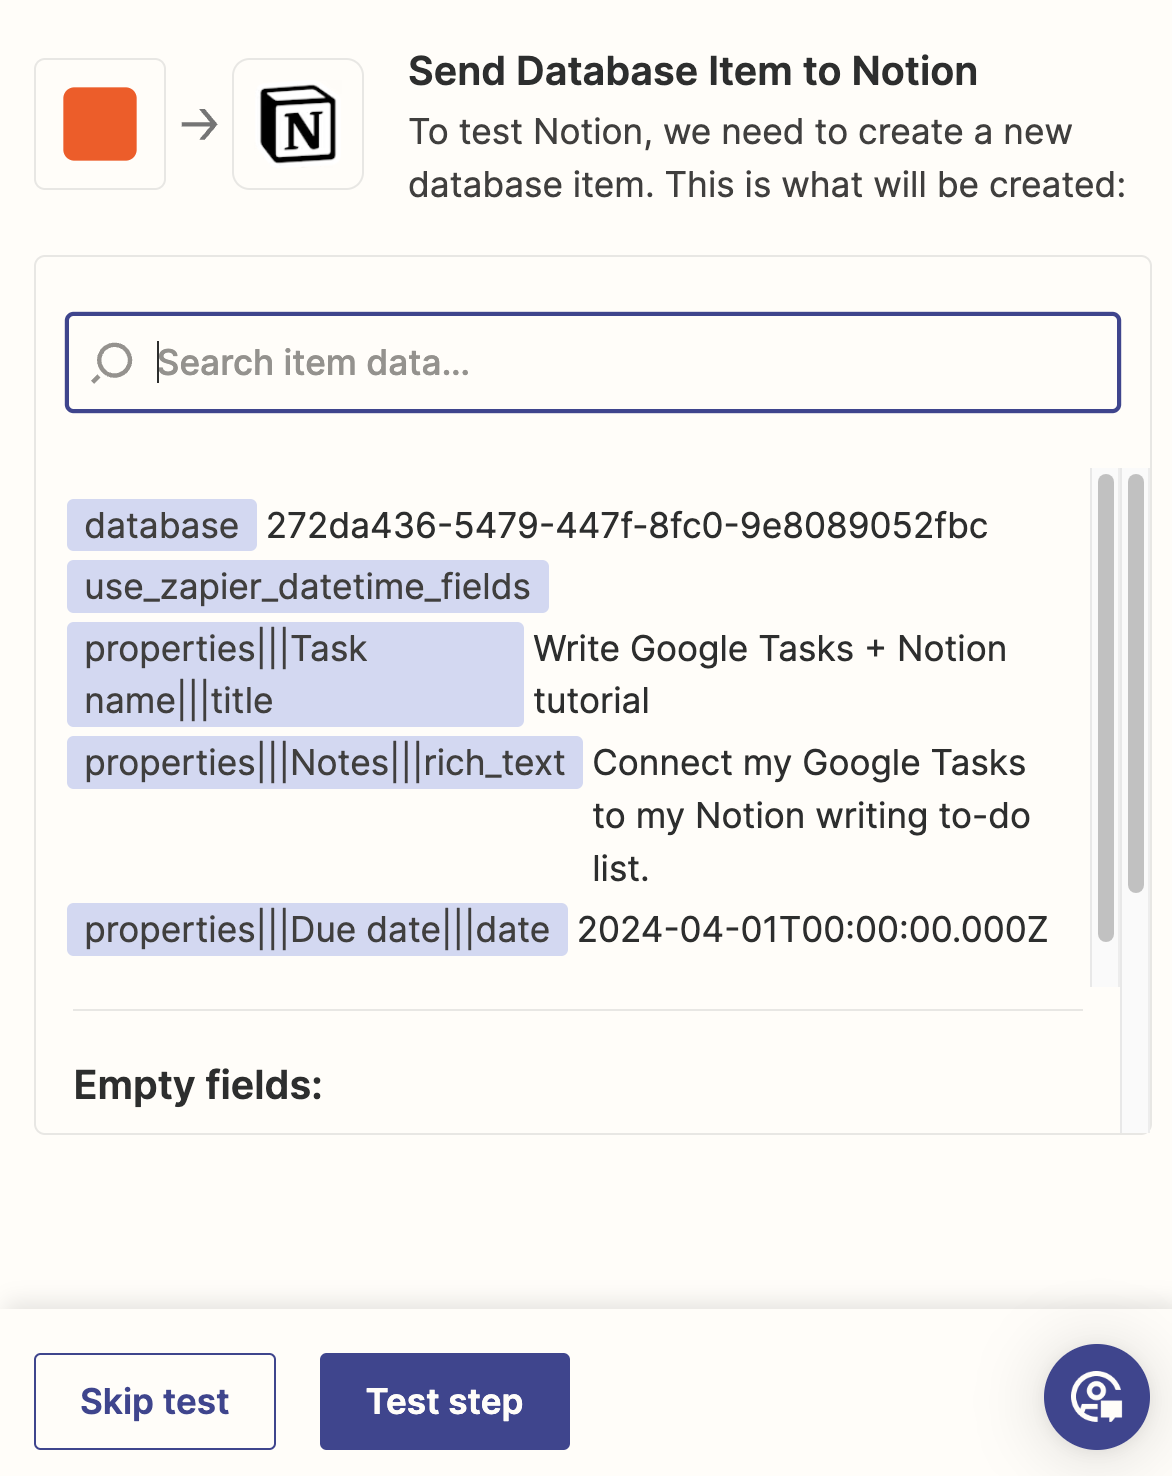 A test page that shows a list of the Google Tasks data being sent to the Notion database.